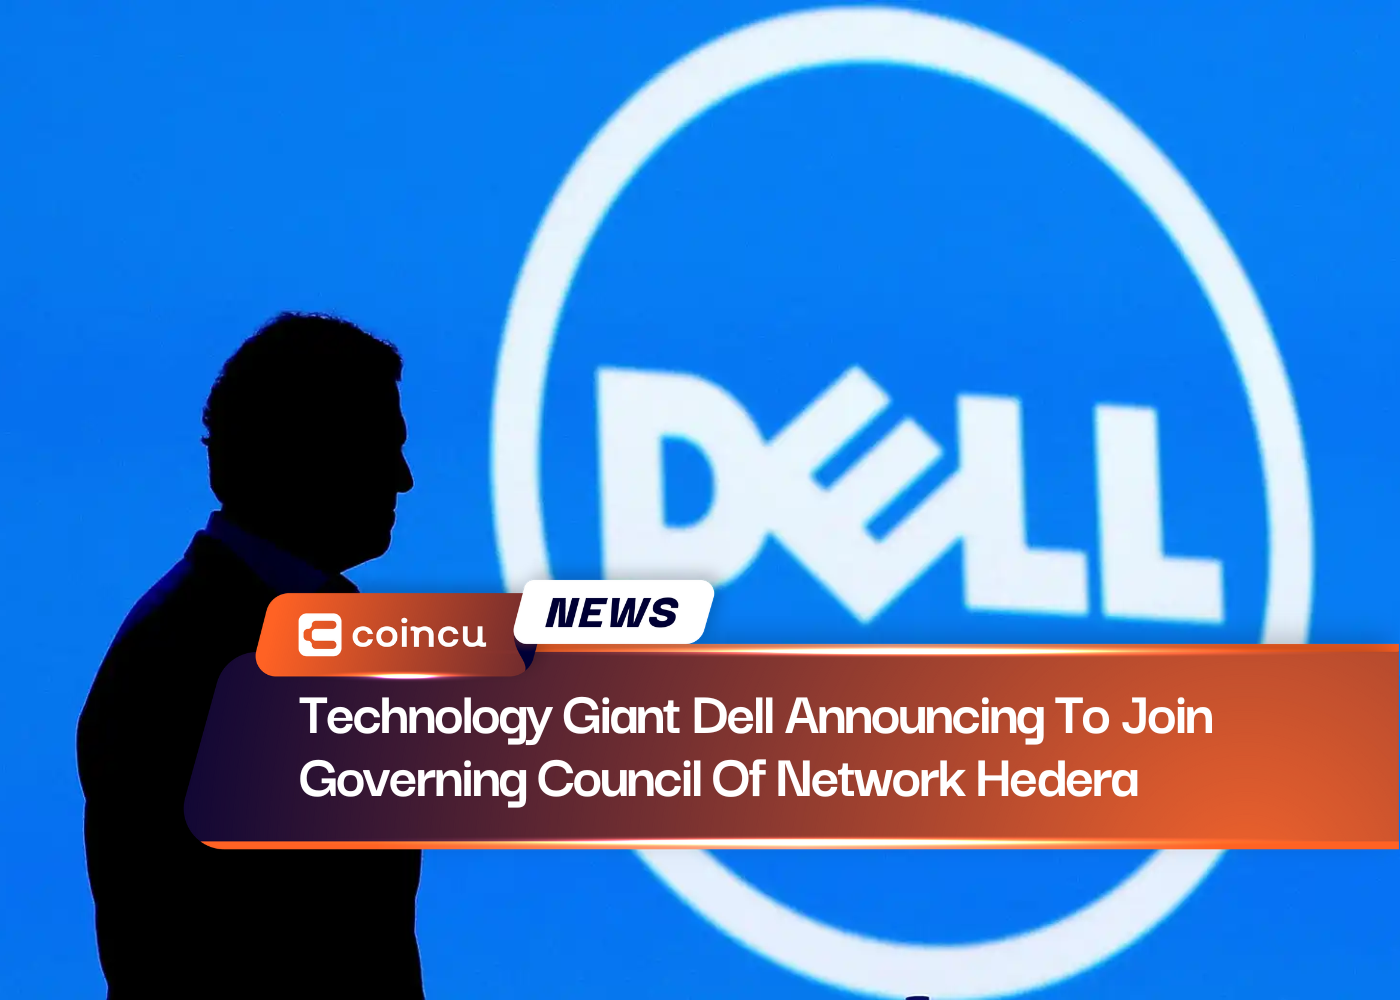 Technology Giant Dell Announcing To Join Governing Council Of Network Hedera